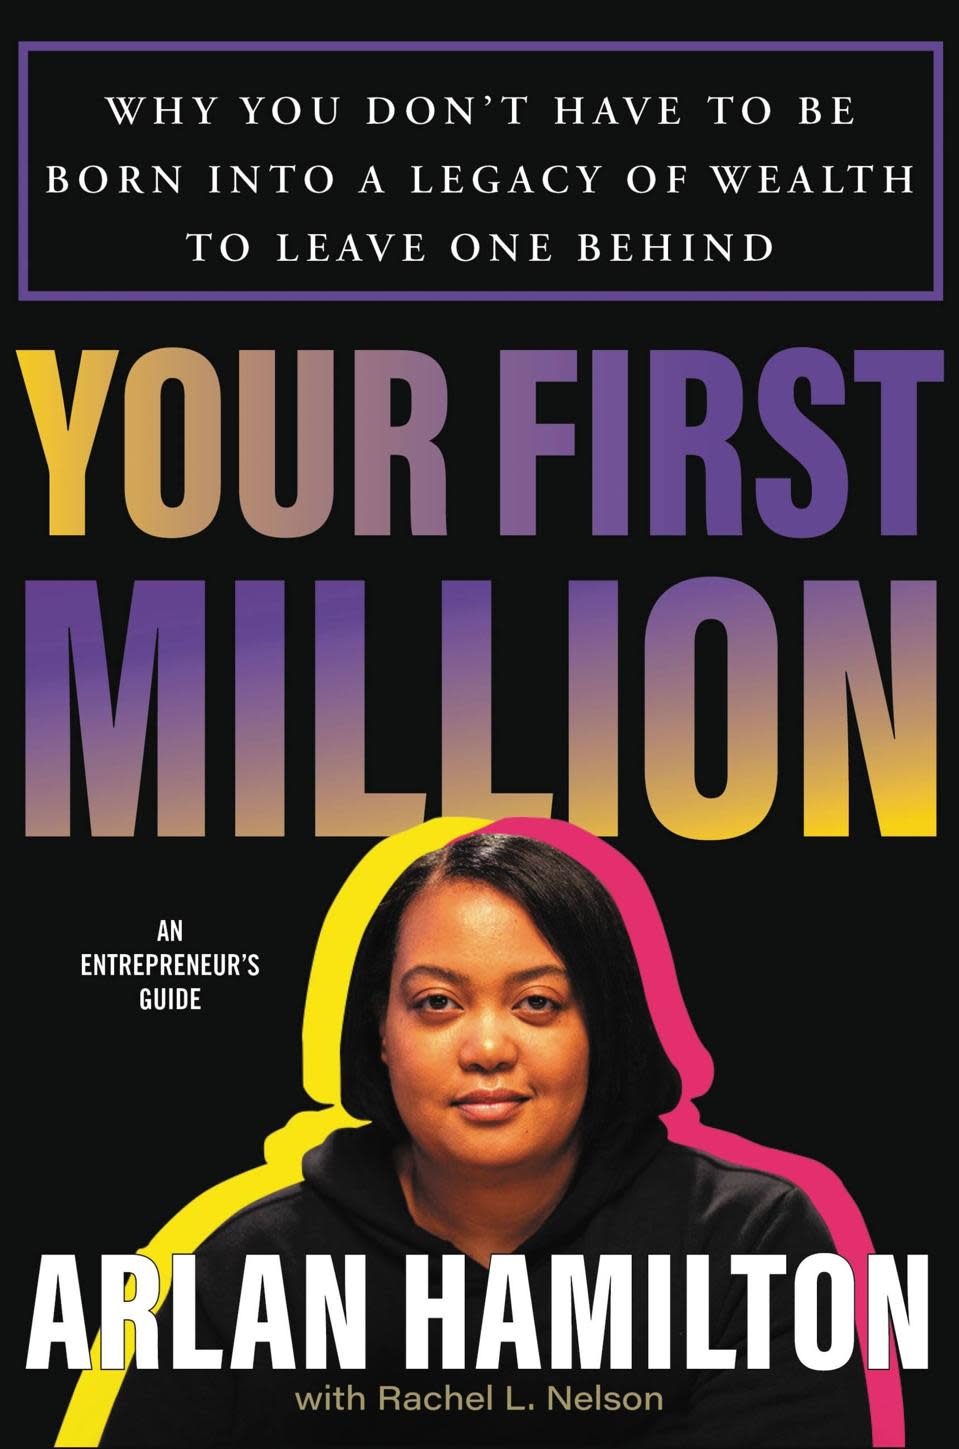 Your First Million book jacket cover